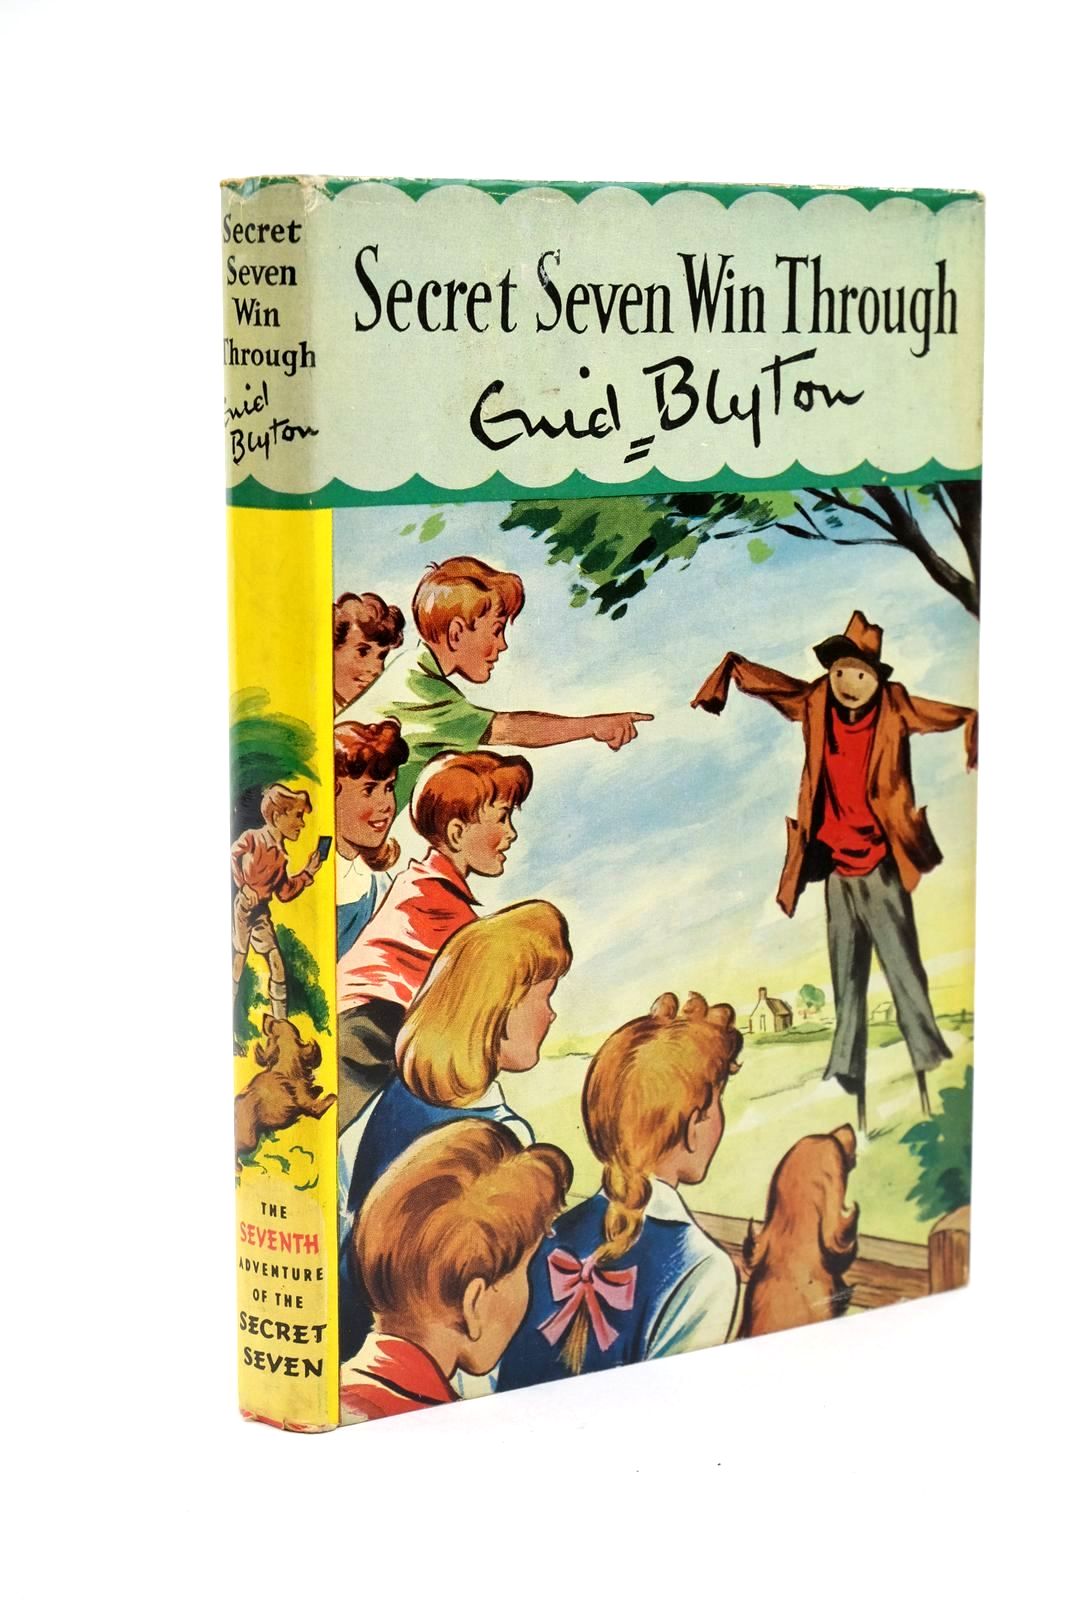 Photo of SECRET SEVEN WIN THROUGH written by Blyton, Enid illustrated by Kay, Bruno published by Brockhampton Press Ltd. (STOCK CODE: 1322982)  for sale by Stella & Rose's Books